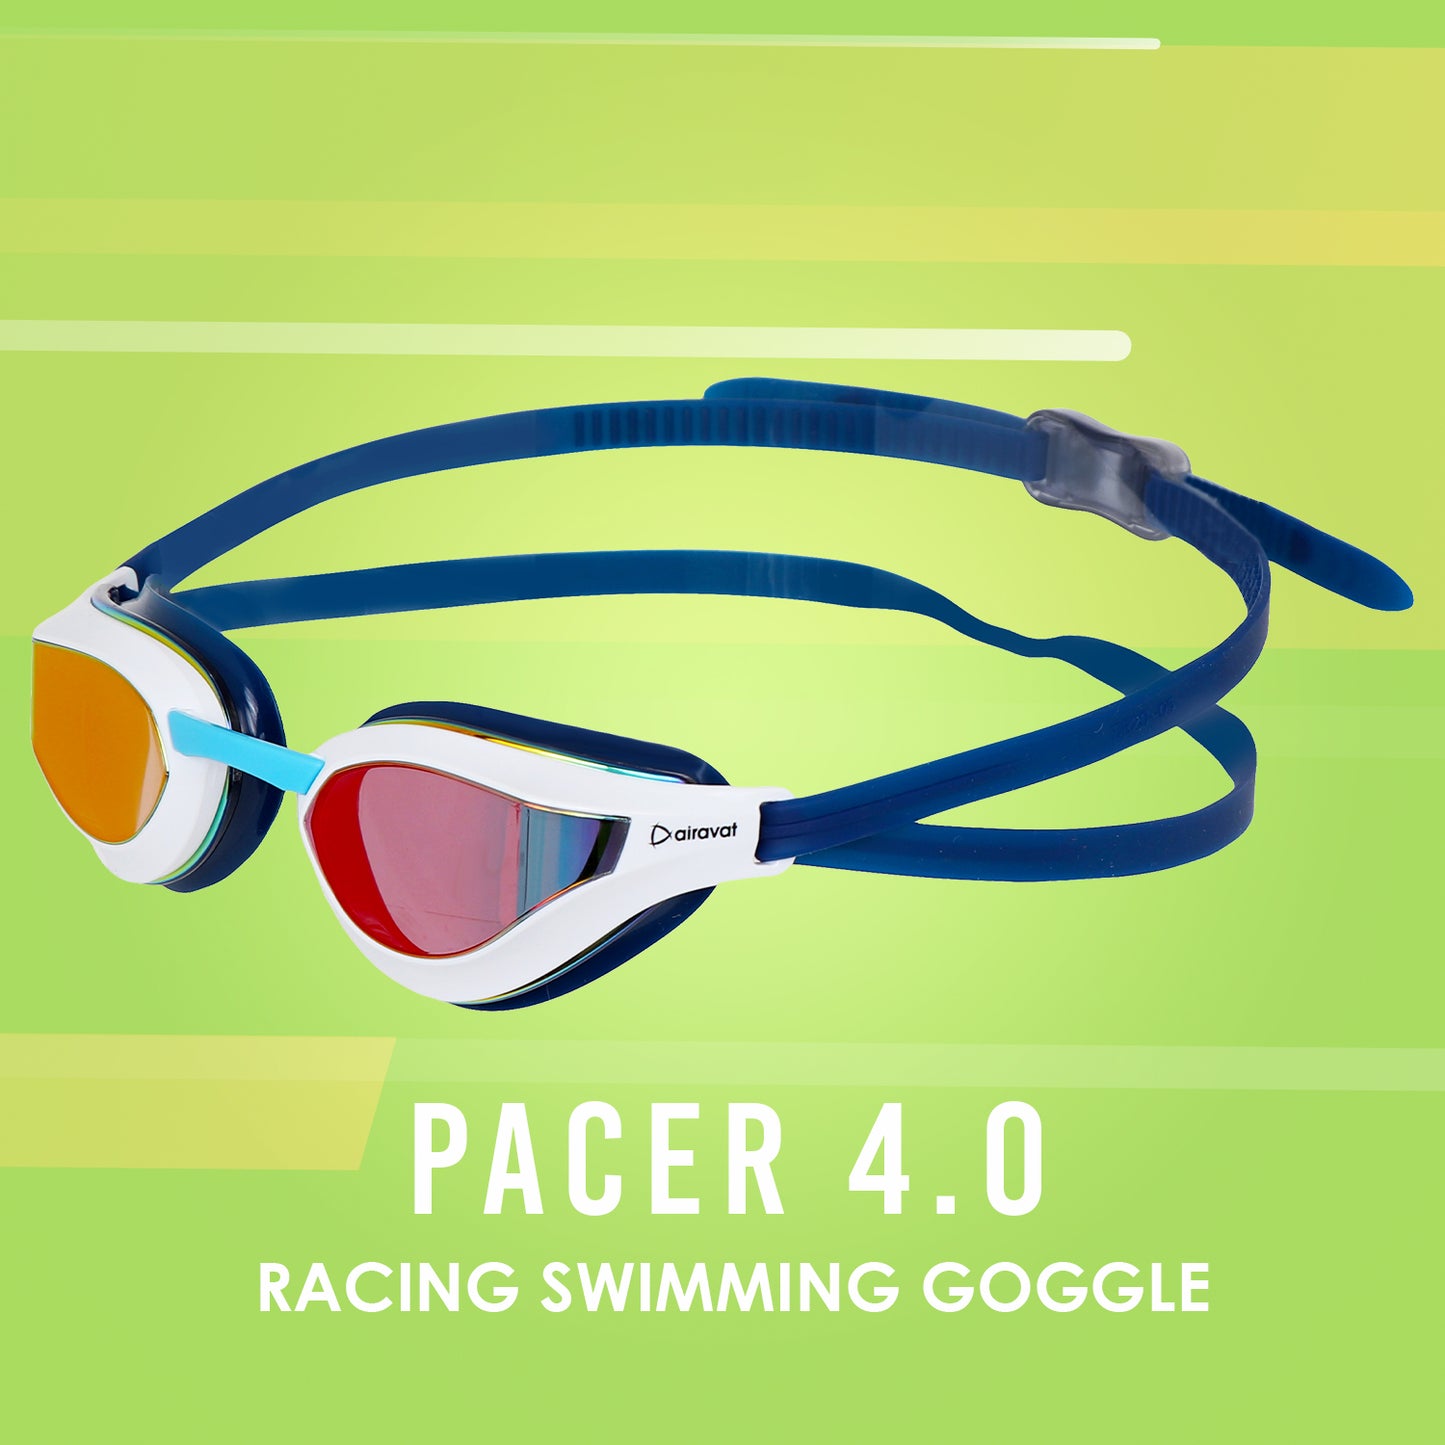 PACER 4.0